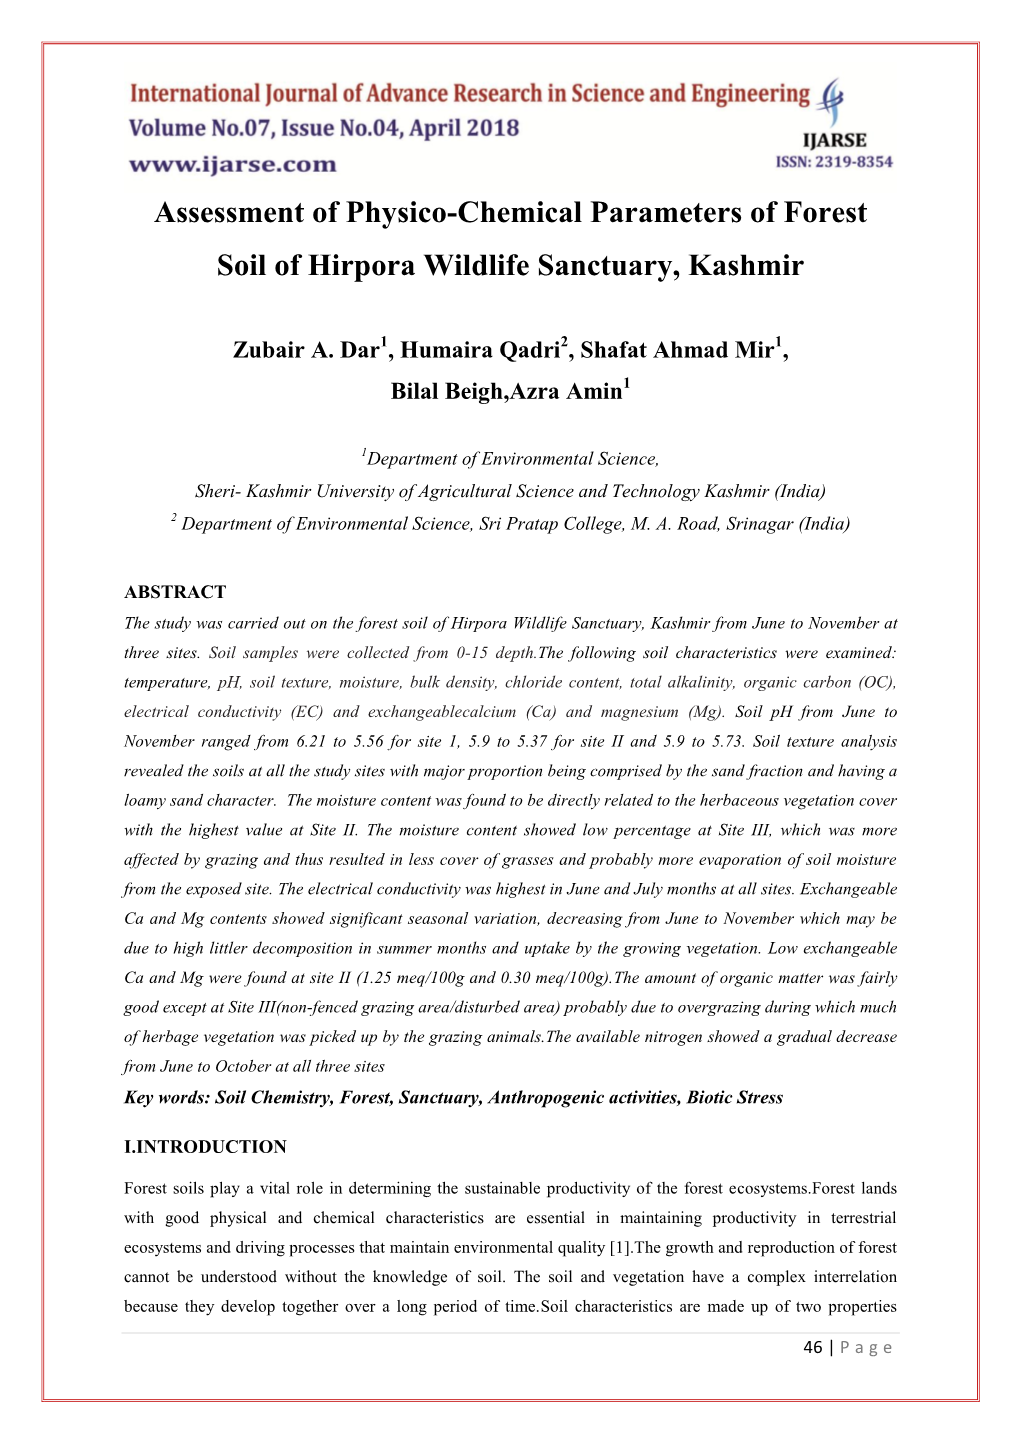 Assessment of Physico-Chemical Parameters of Forest Soil of Hirpora Wildlife Sanctuary, Kashmir